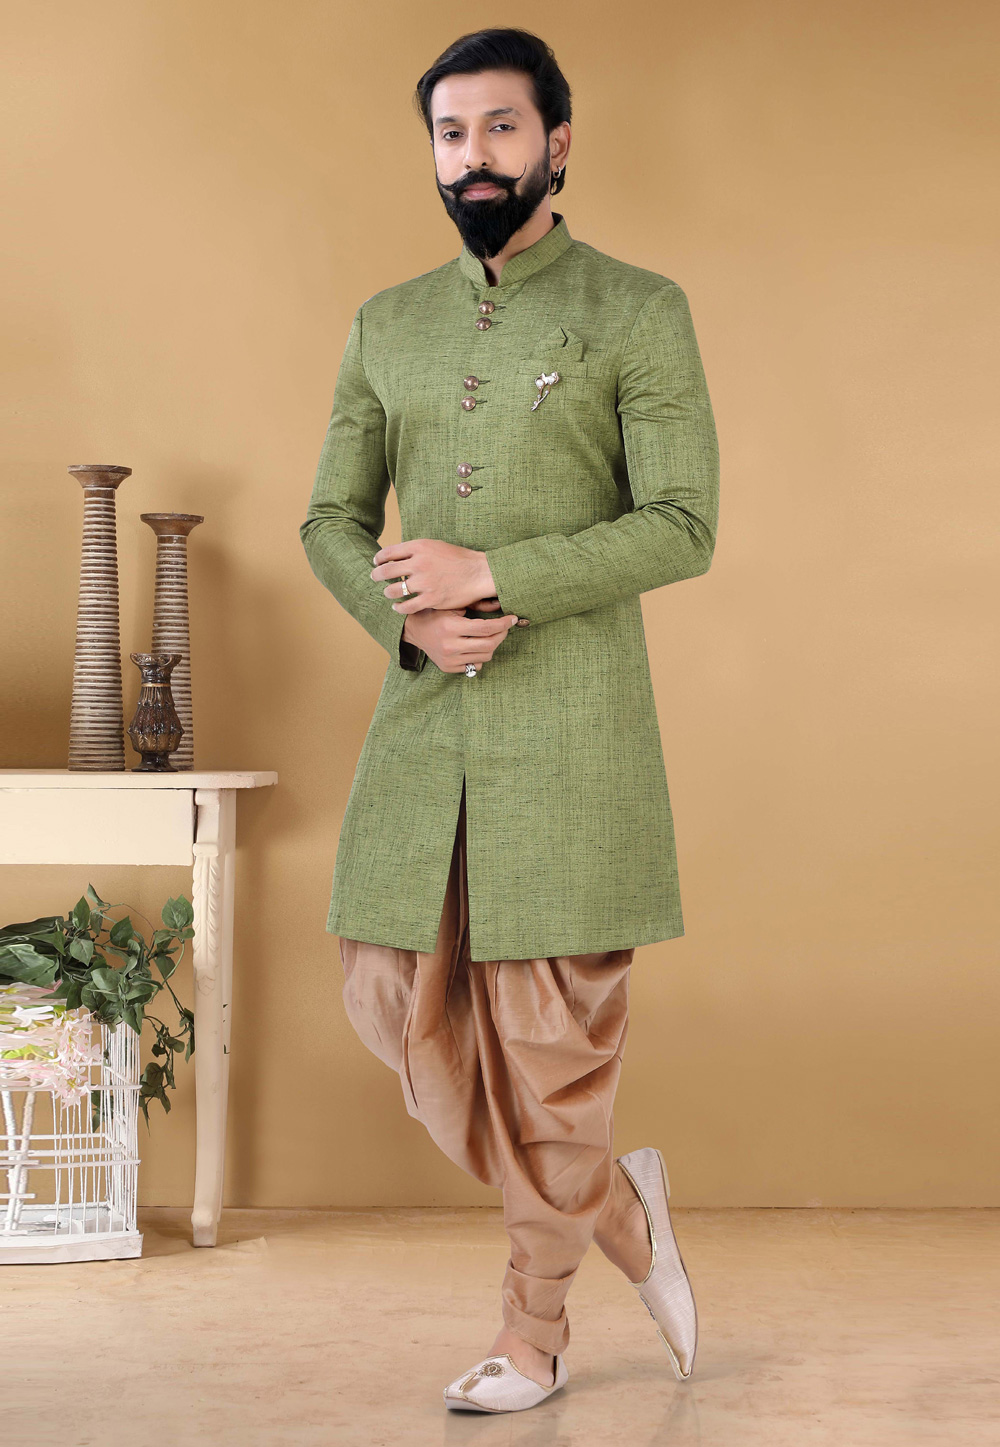 https://resources.indianclothstore.com/resources/productimages/15795001122022-Light-Green-Linen-Indo-Western-Sherwani.jpg